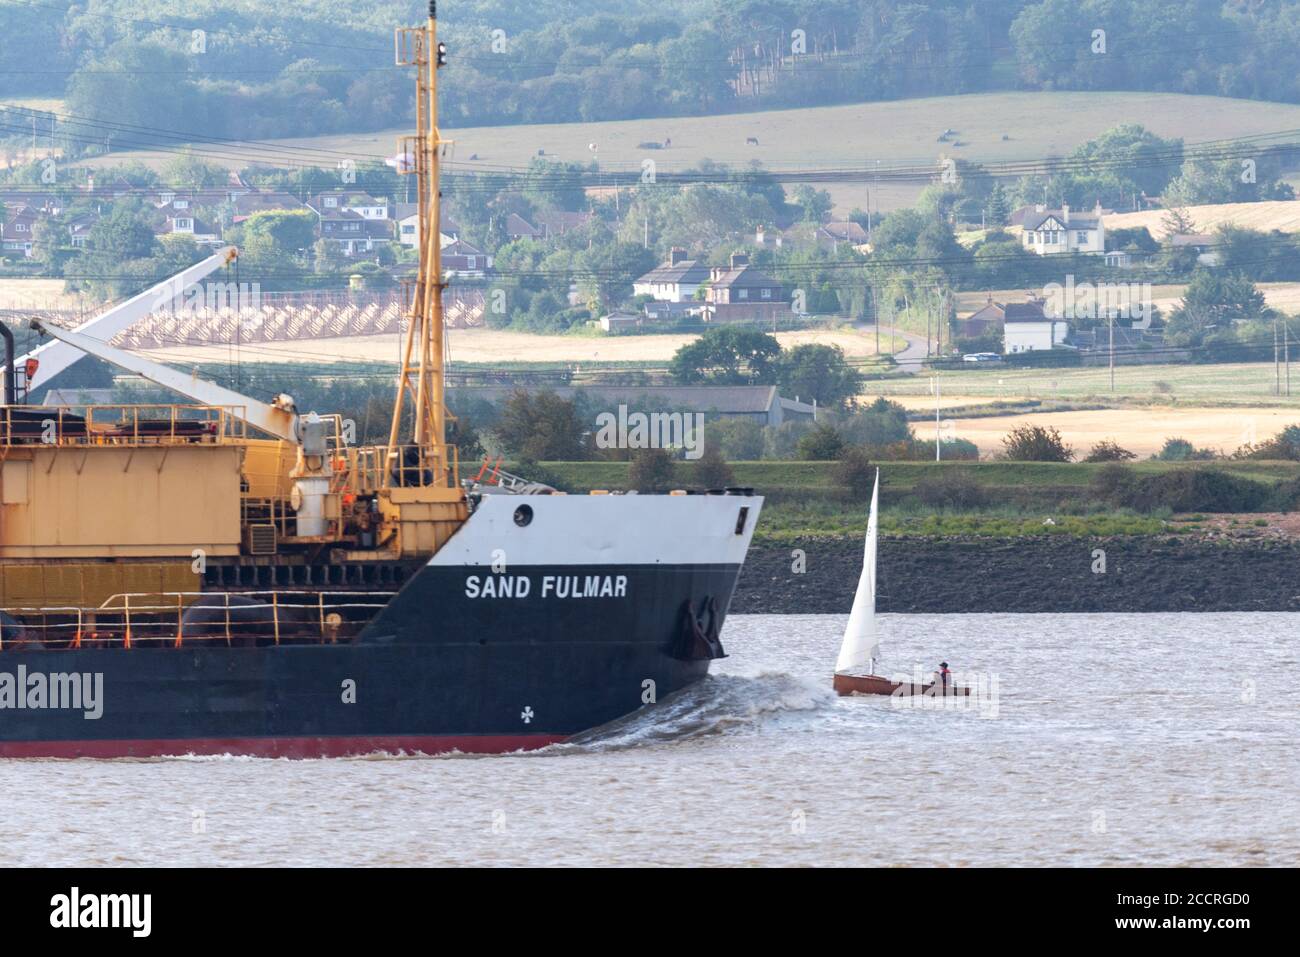 Hopper Dredger, Sand Fulmar, with bow wave passing a small vintage wooden sailing boat. Little and large, scale of different river traffic on Thames Stock Photo